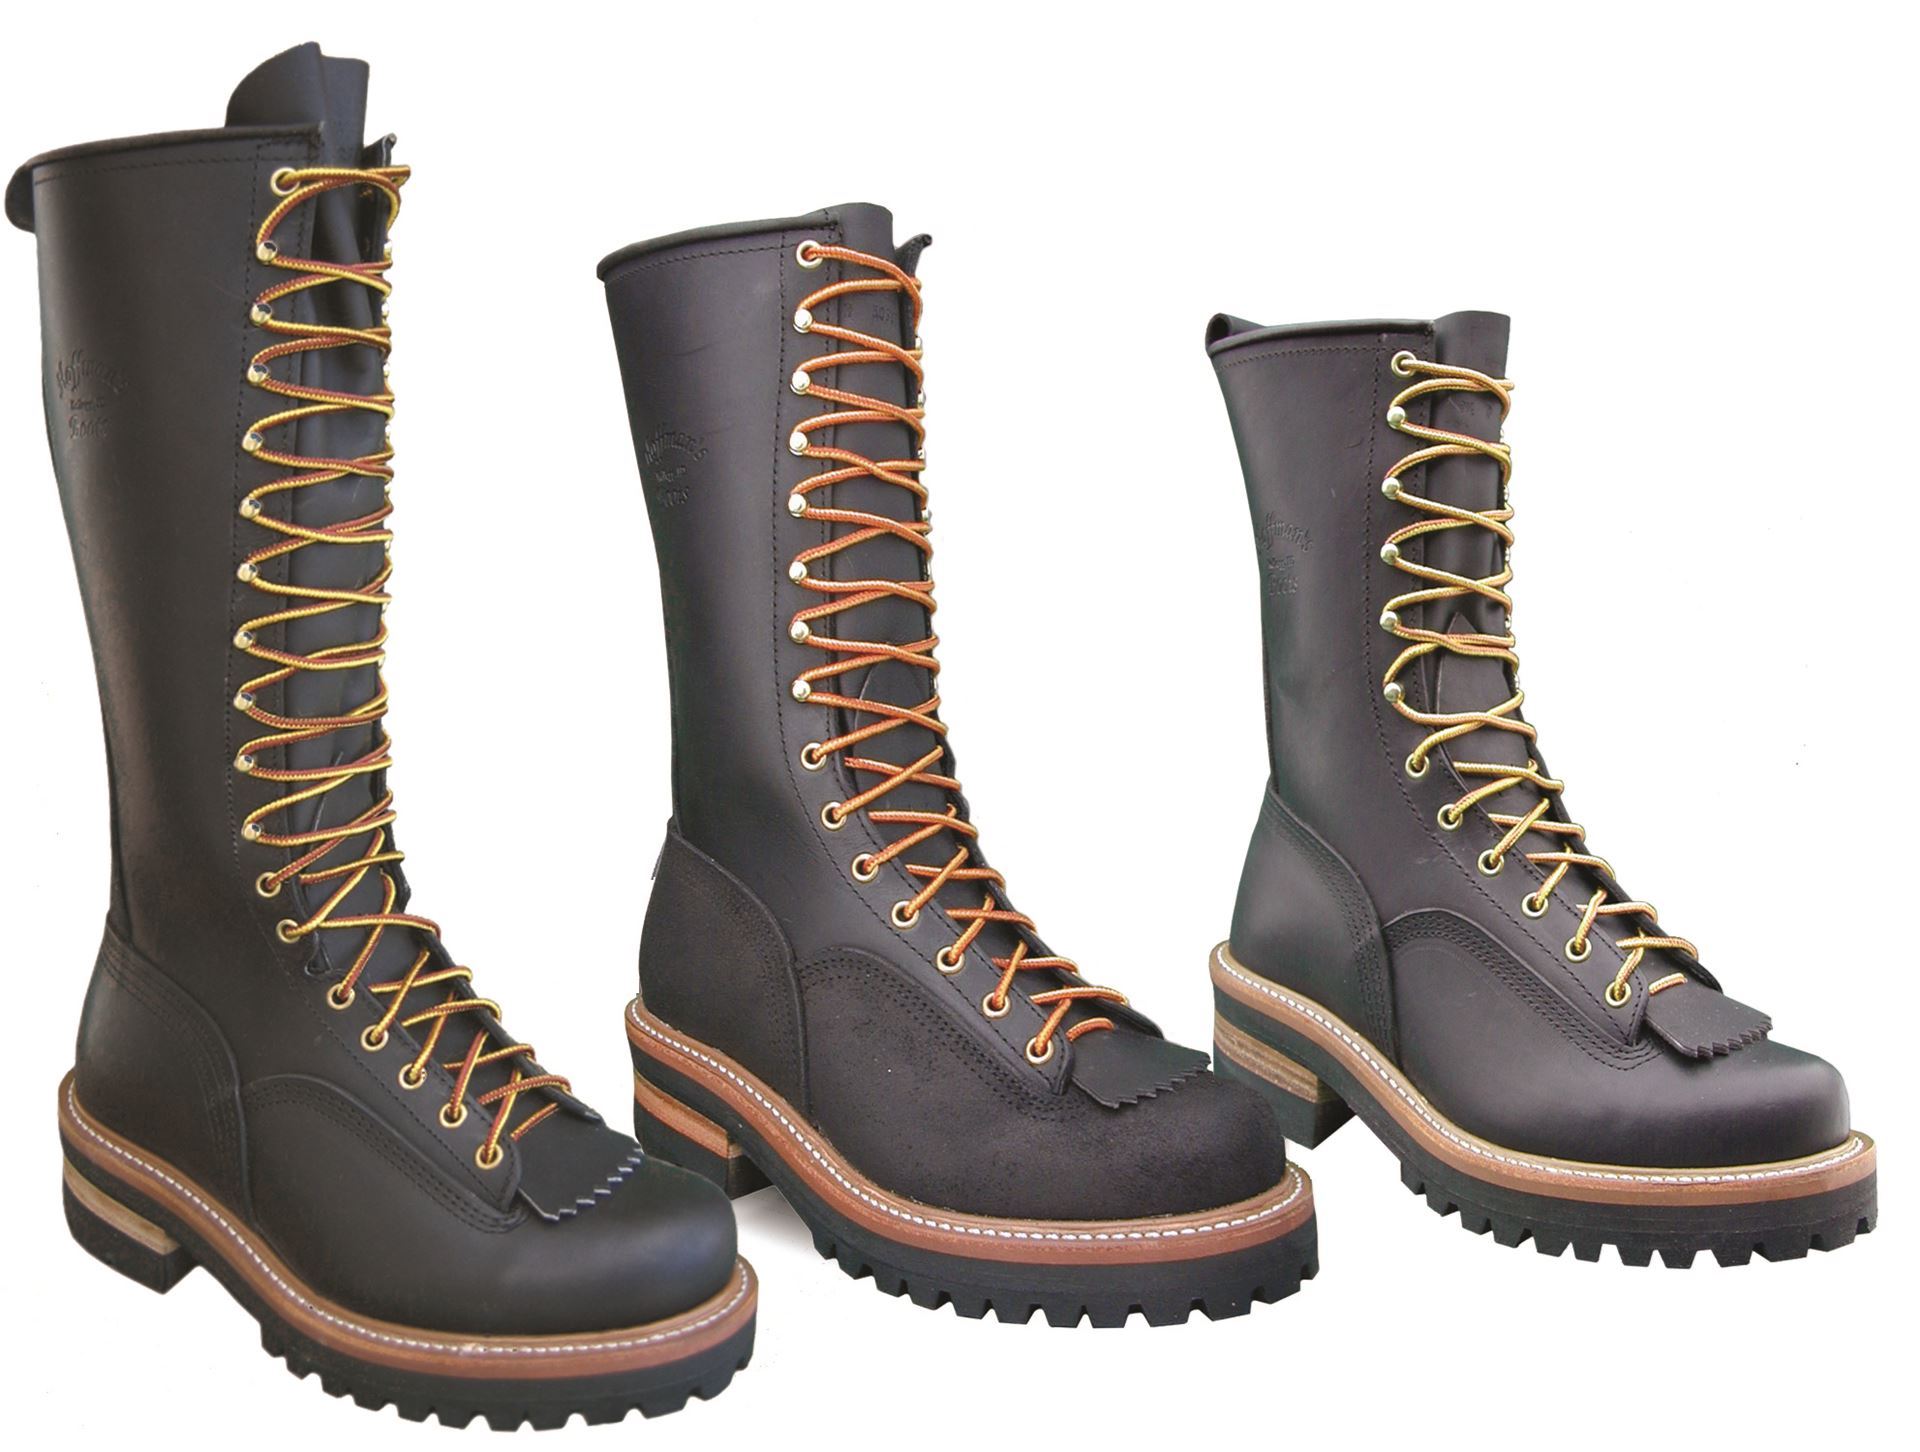 https://hoffmanboots.com/wp-content/uploads/2018/08/products-0000607_10-12-and-16-vibram-work-boots.jpeg